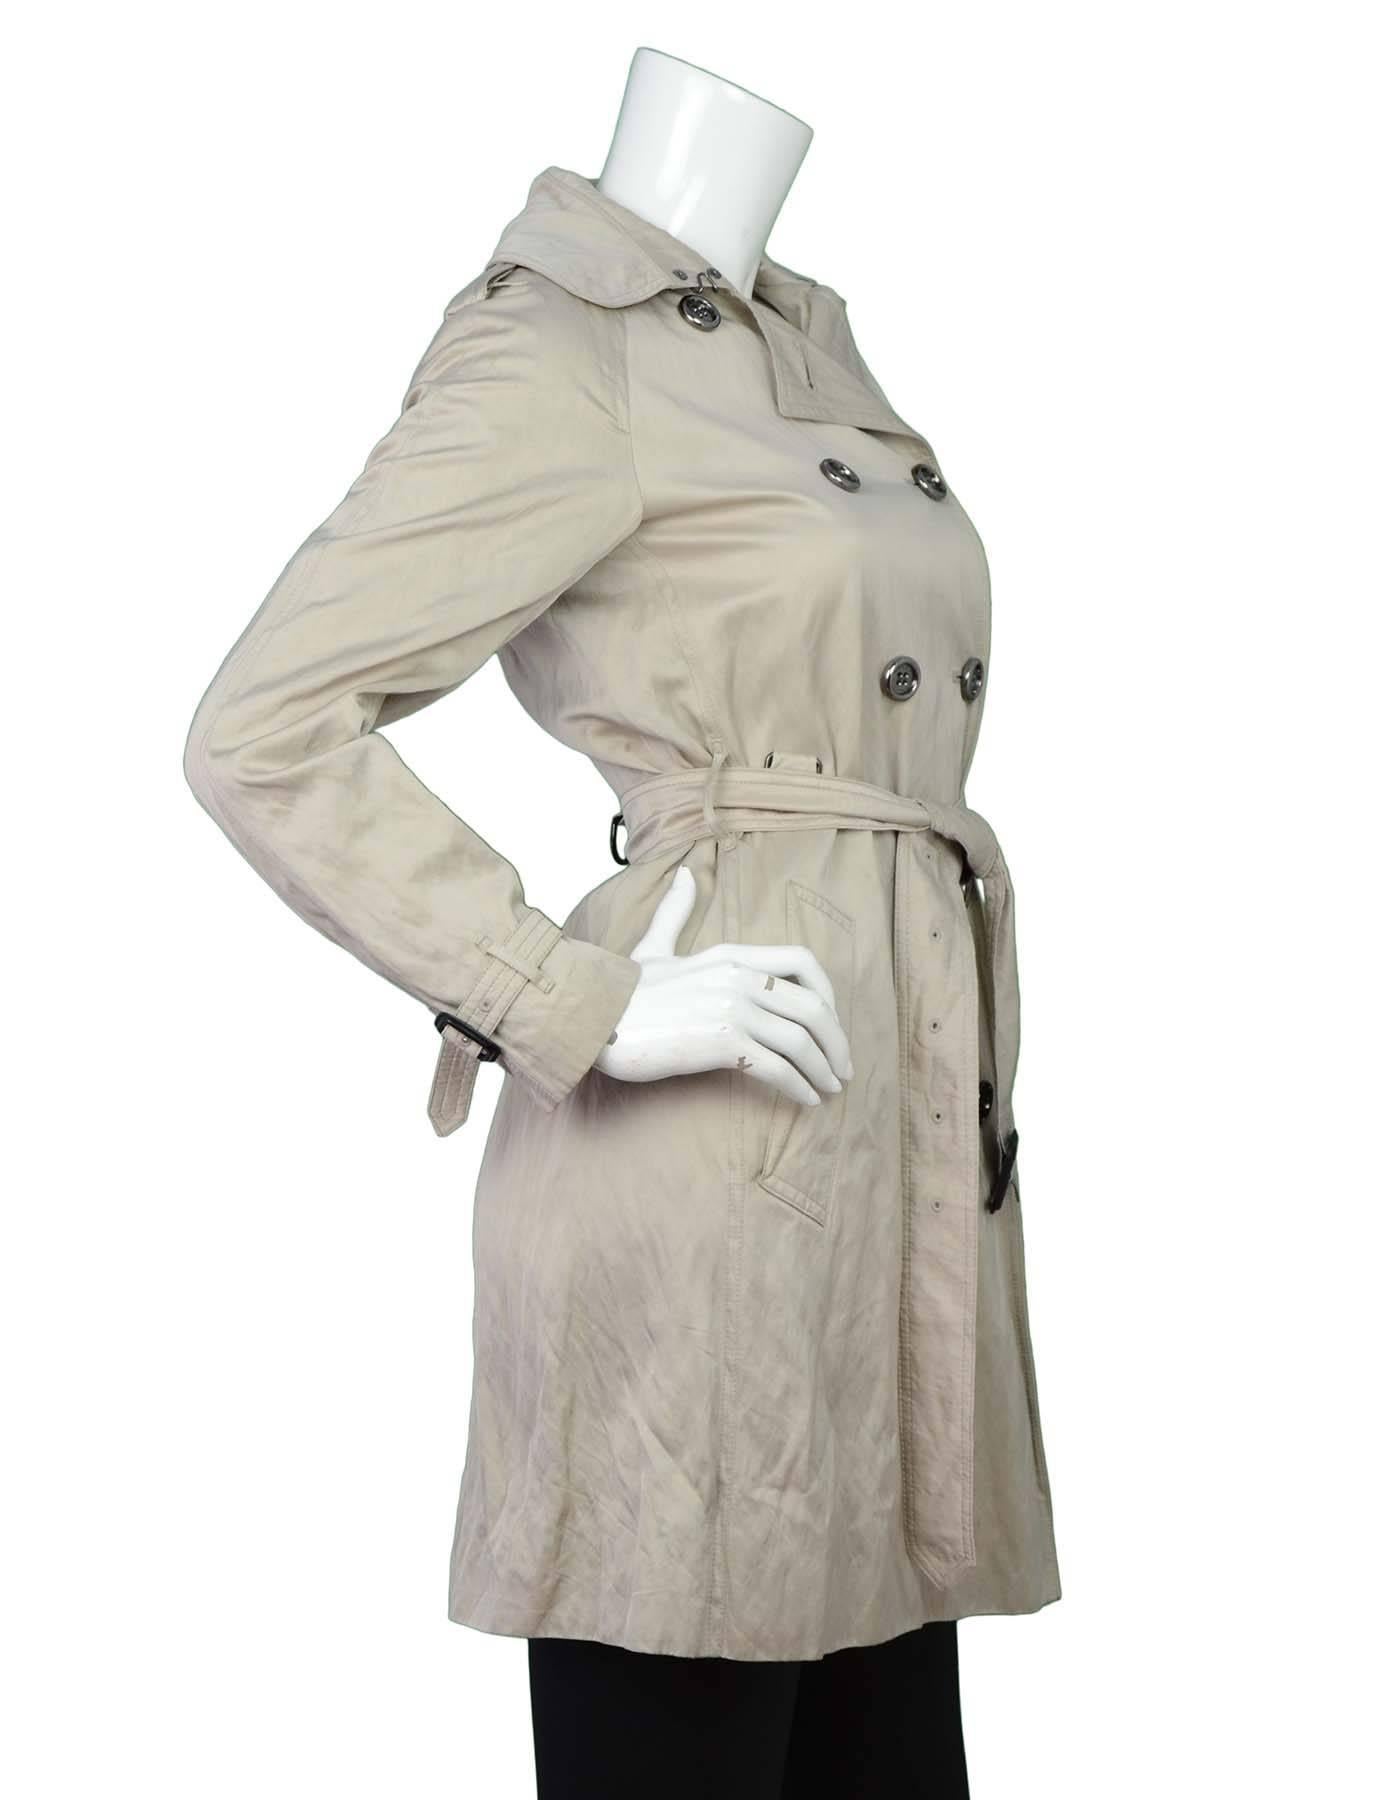 Burberry Khaki Trench Coat Sz 4
Features double-breast buttons and belt at waist

Made In: Bosnia
Color: Iridescent khaki
Composition: 51% viscose, 43% cotton, 6% metallic fibers
Lining: Grey nova check
Closure/Opening: Double breasted button